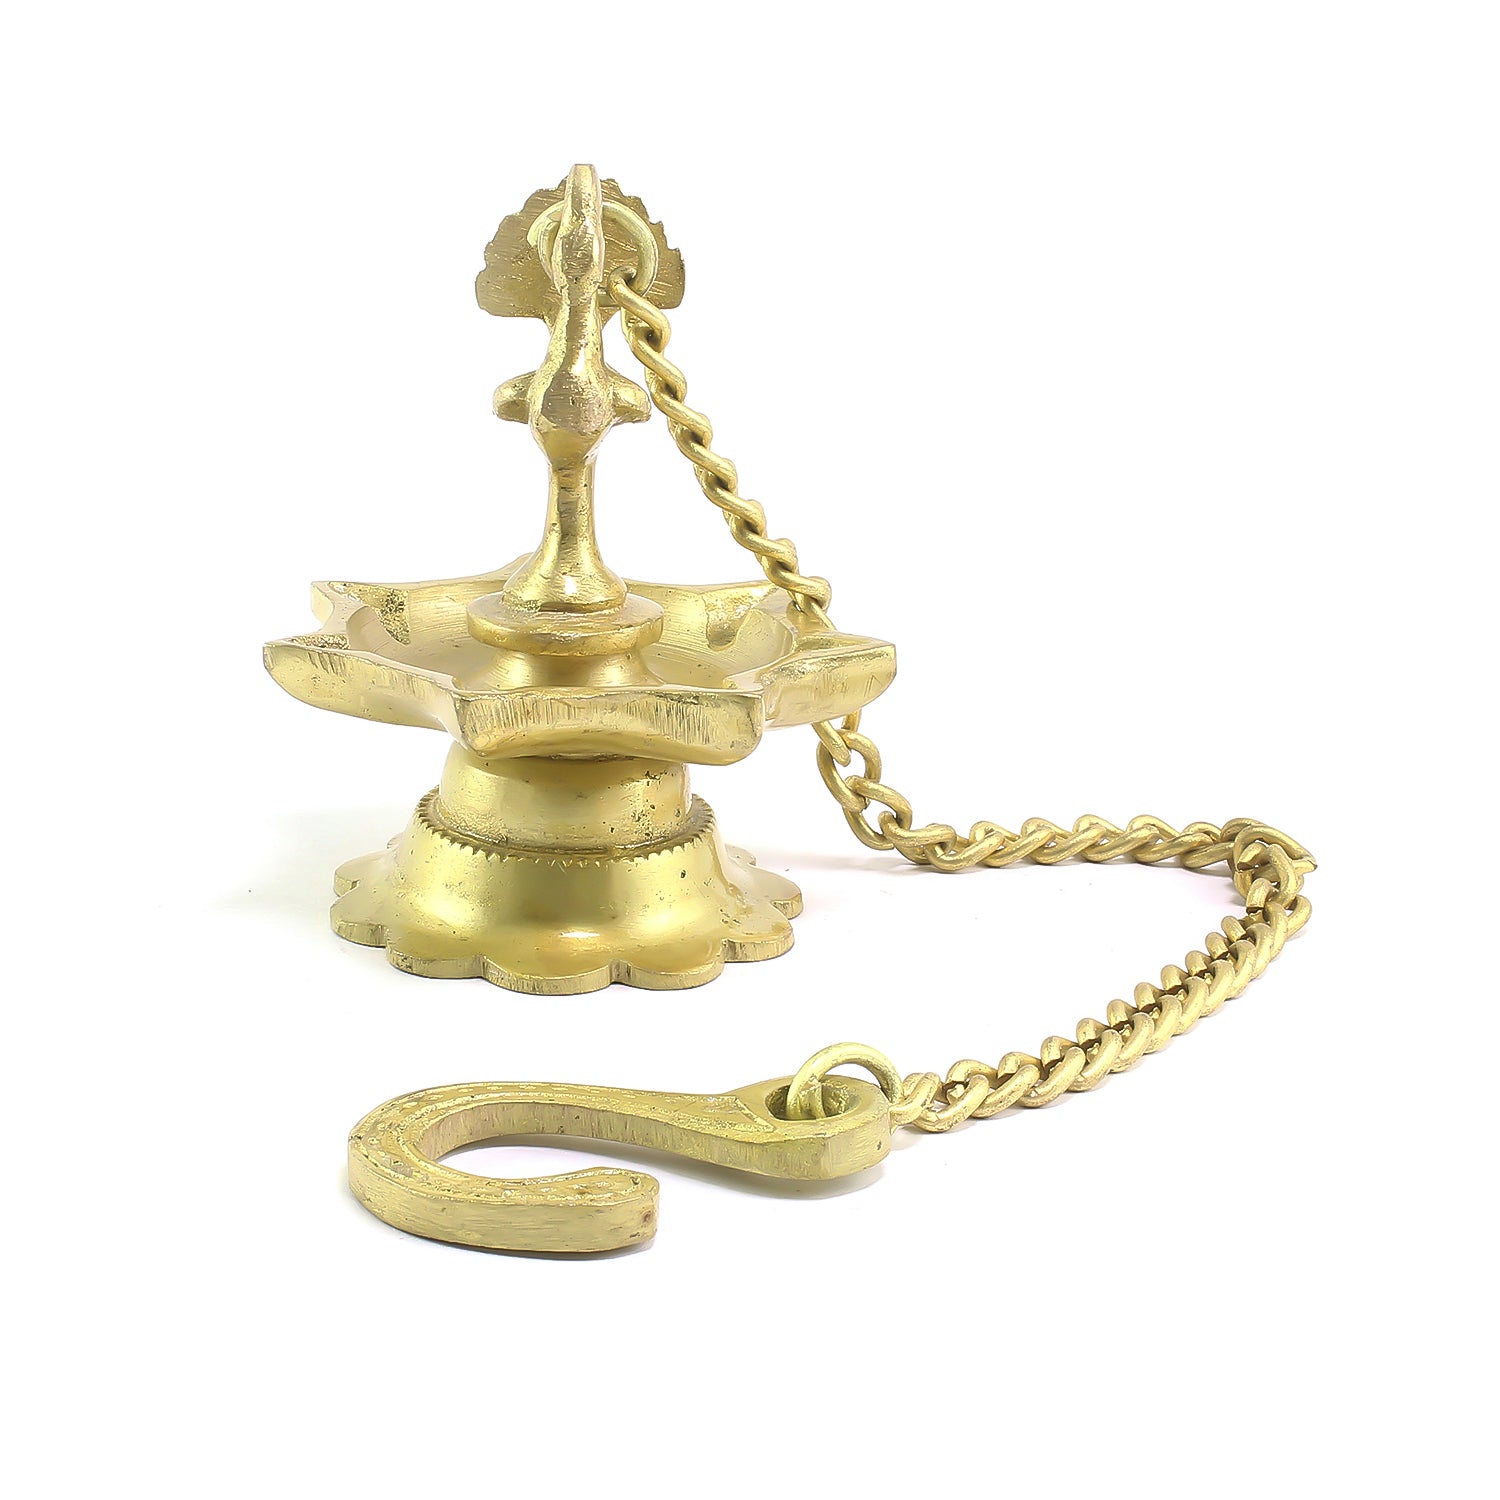 7 Wicks Decorative Peacock Brass Diya With Bell Wall Hanging With Chain 4